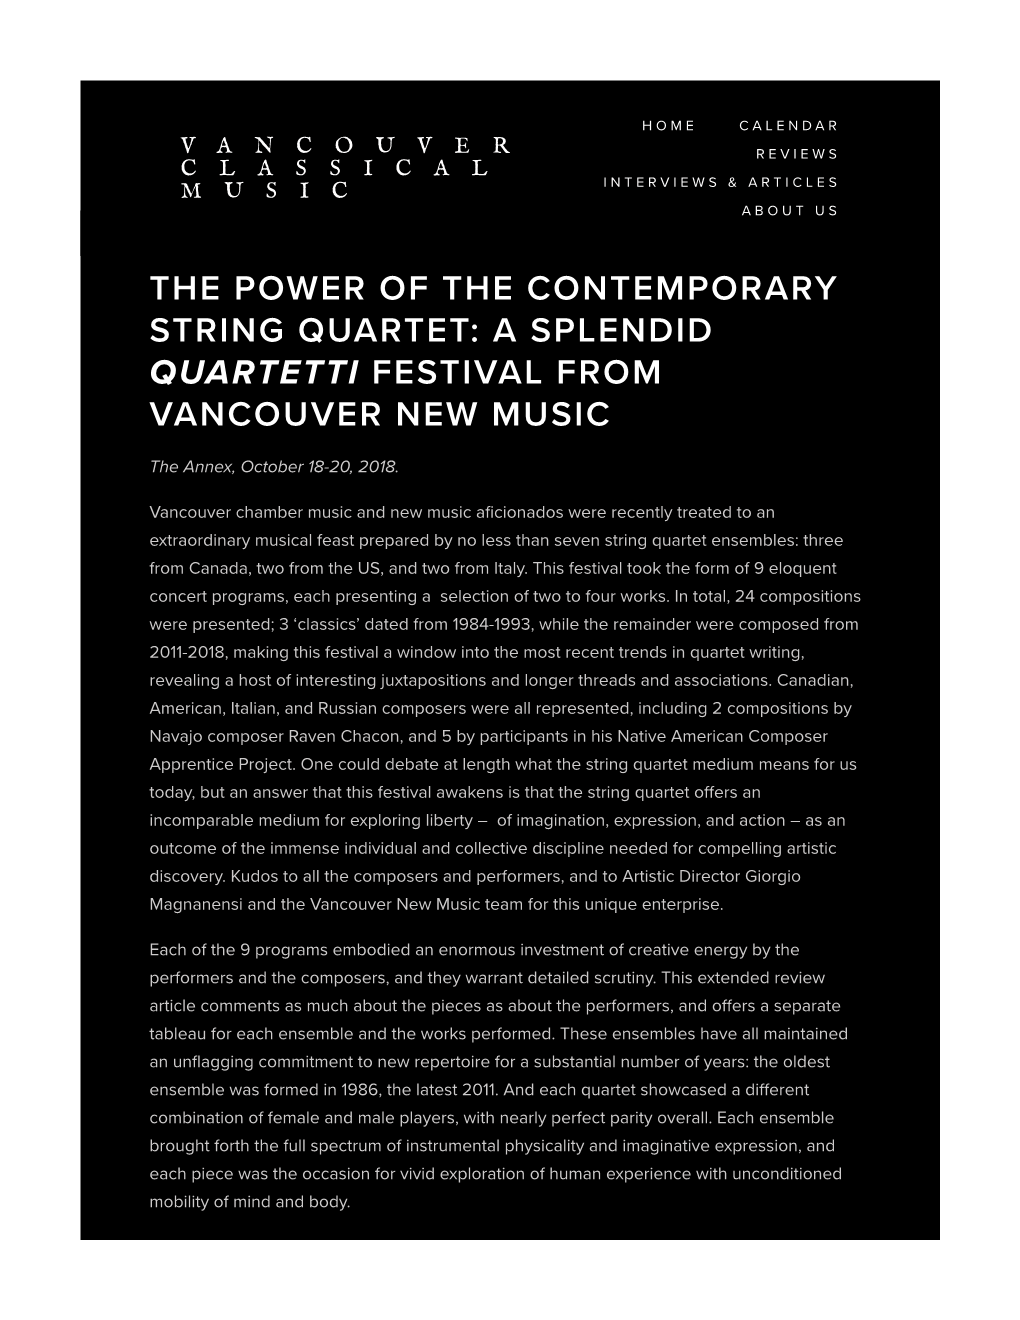 The Power of the Contemporary String Quartet: a Splendid Quartetti Festival from Vancouver New Music